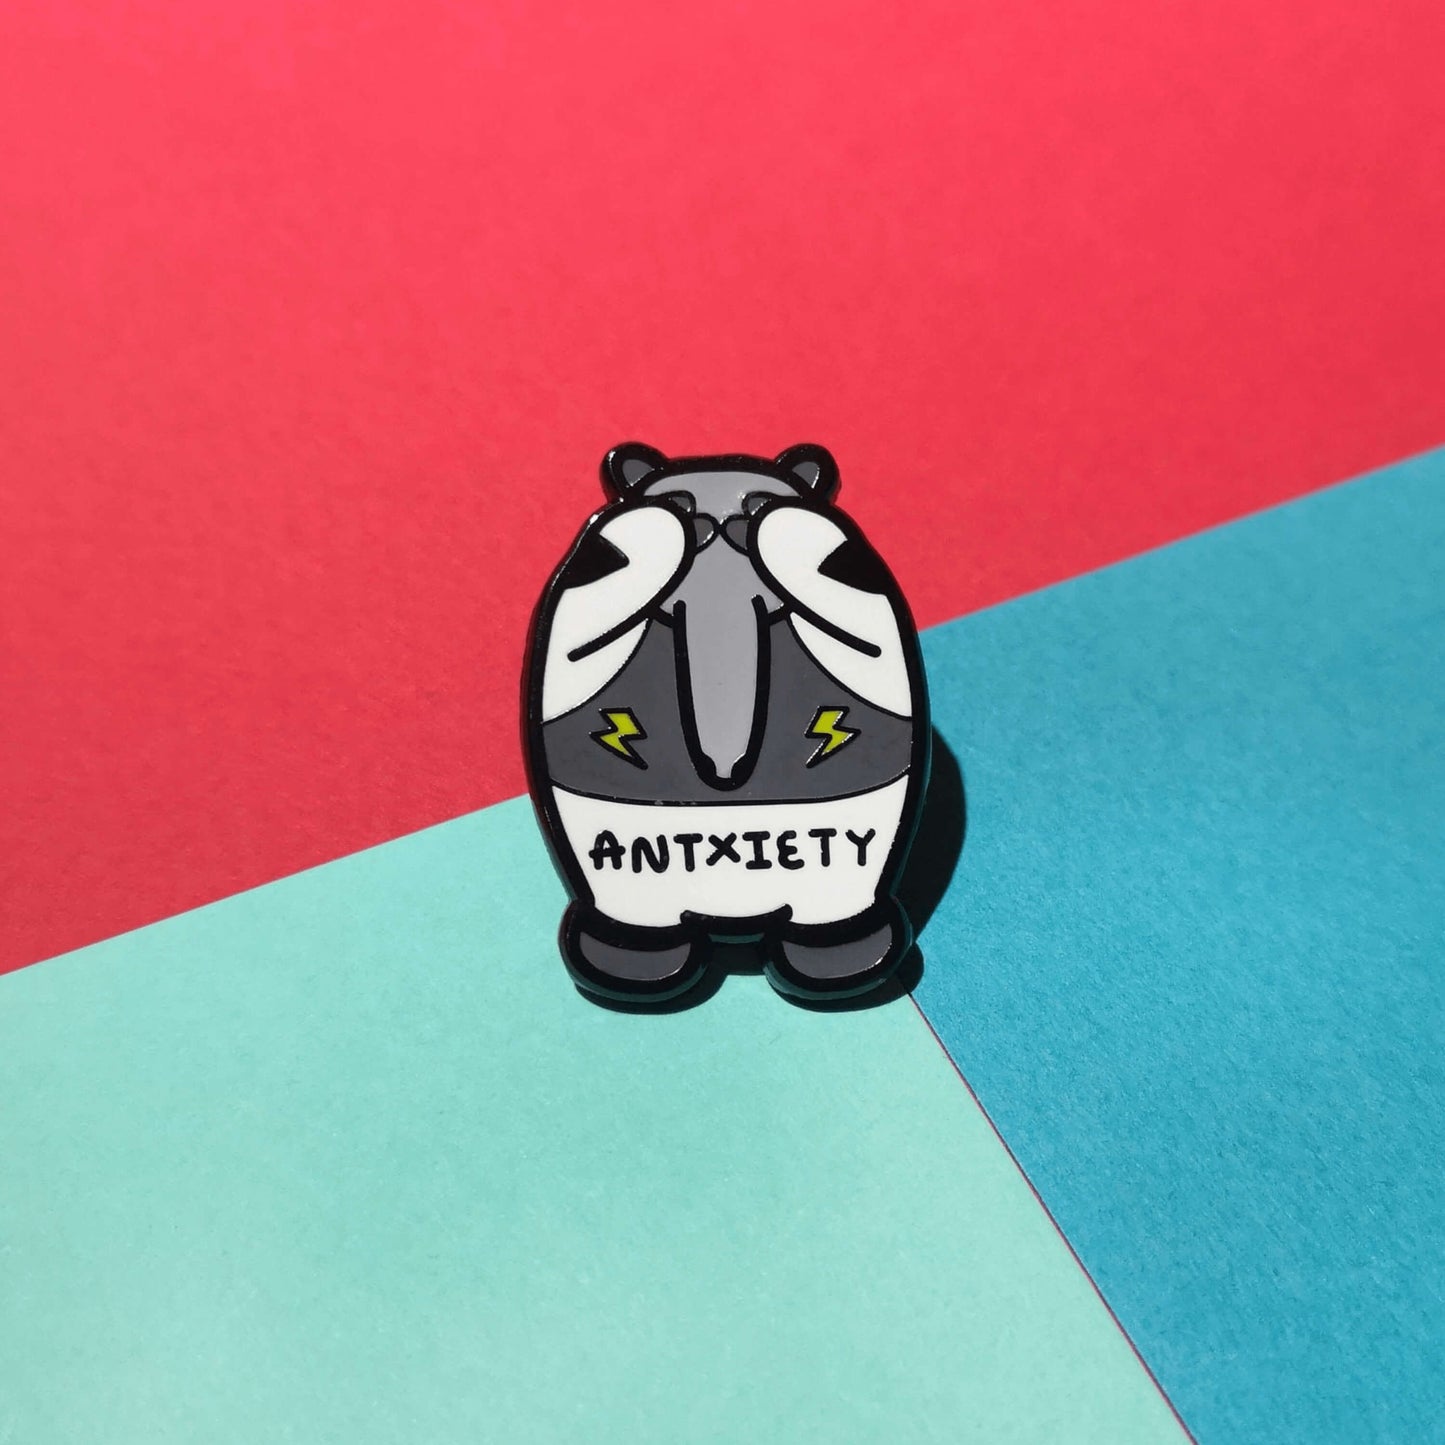 Antxiety Enamel Pin - Anxiety sat on a blue, green and red background. The pin is a grey and white anteater with yellow lightning bolts and the word antxiety across its belly. The pin is designed to raise awareness for anxiety disorders and anxious emotions.